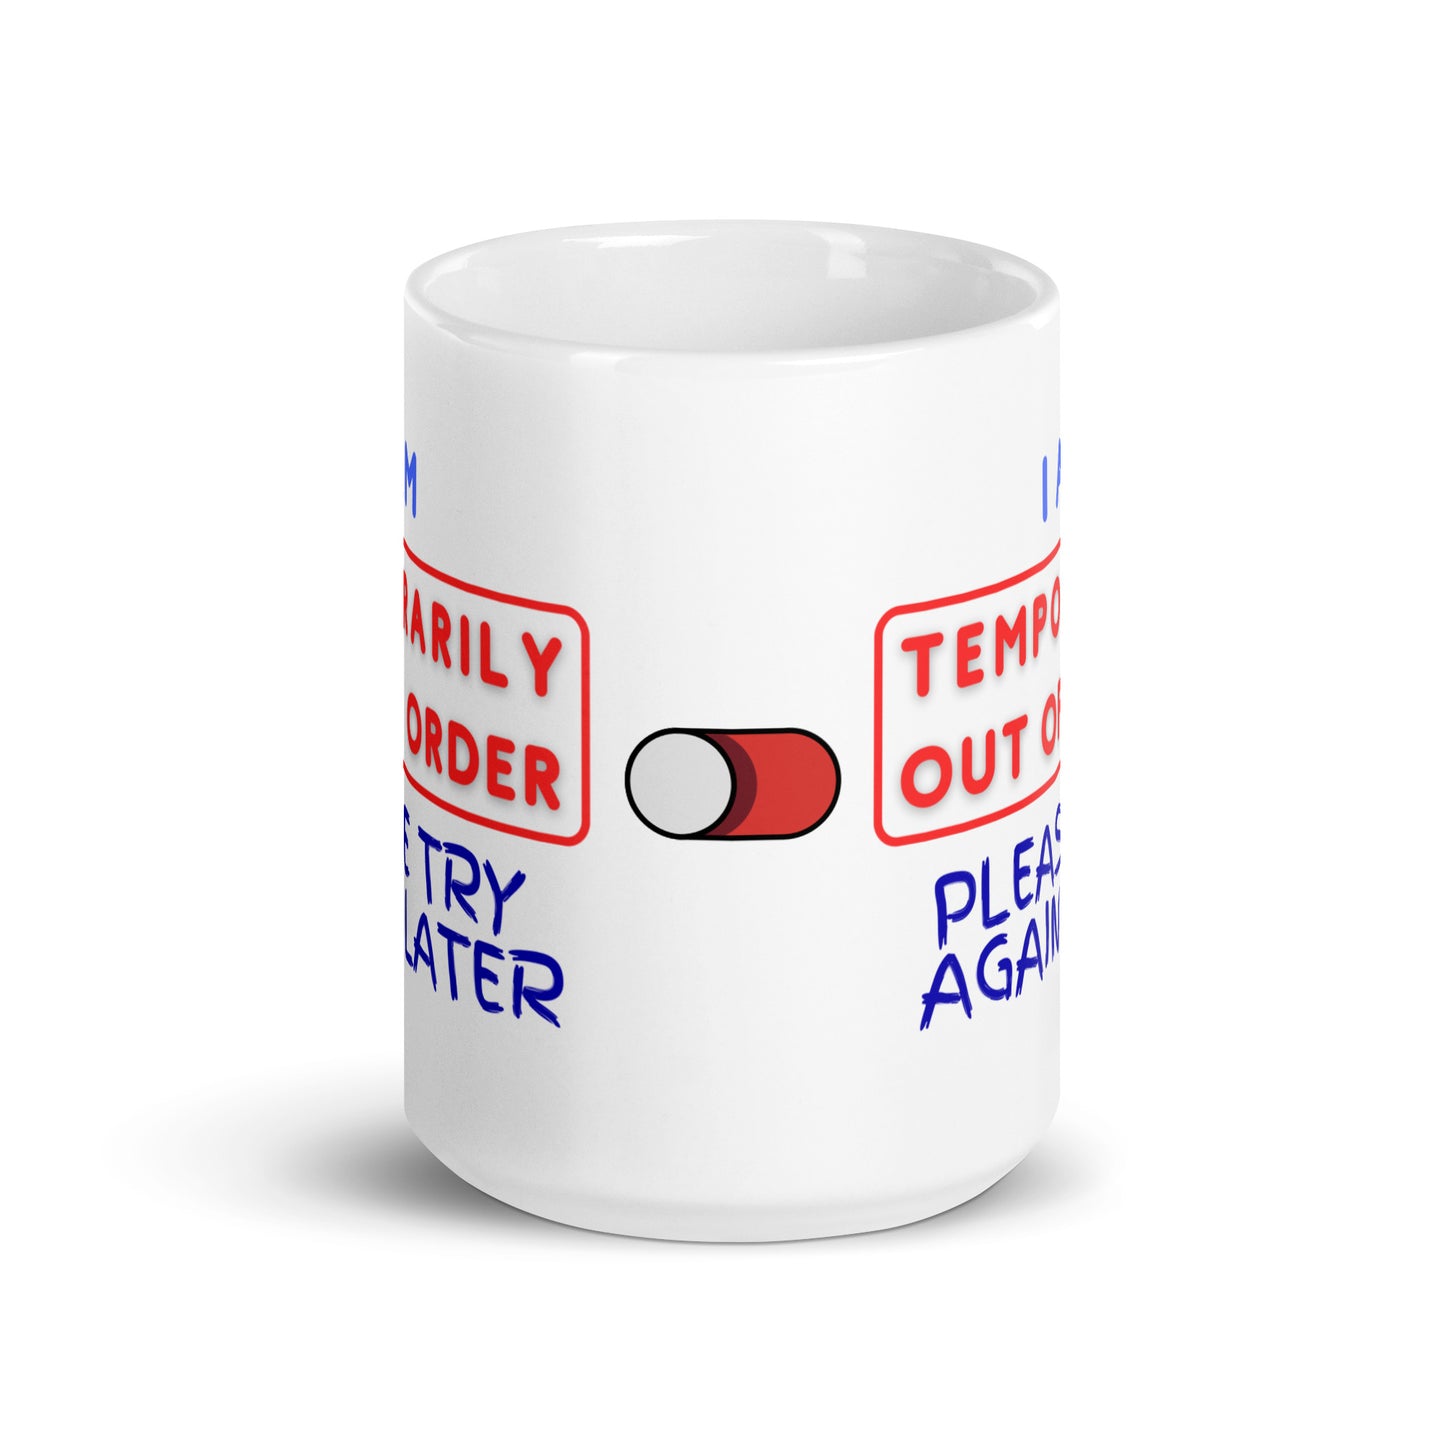 White Glossy Mug - Temporarily Out Of Order